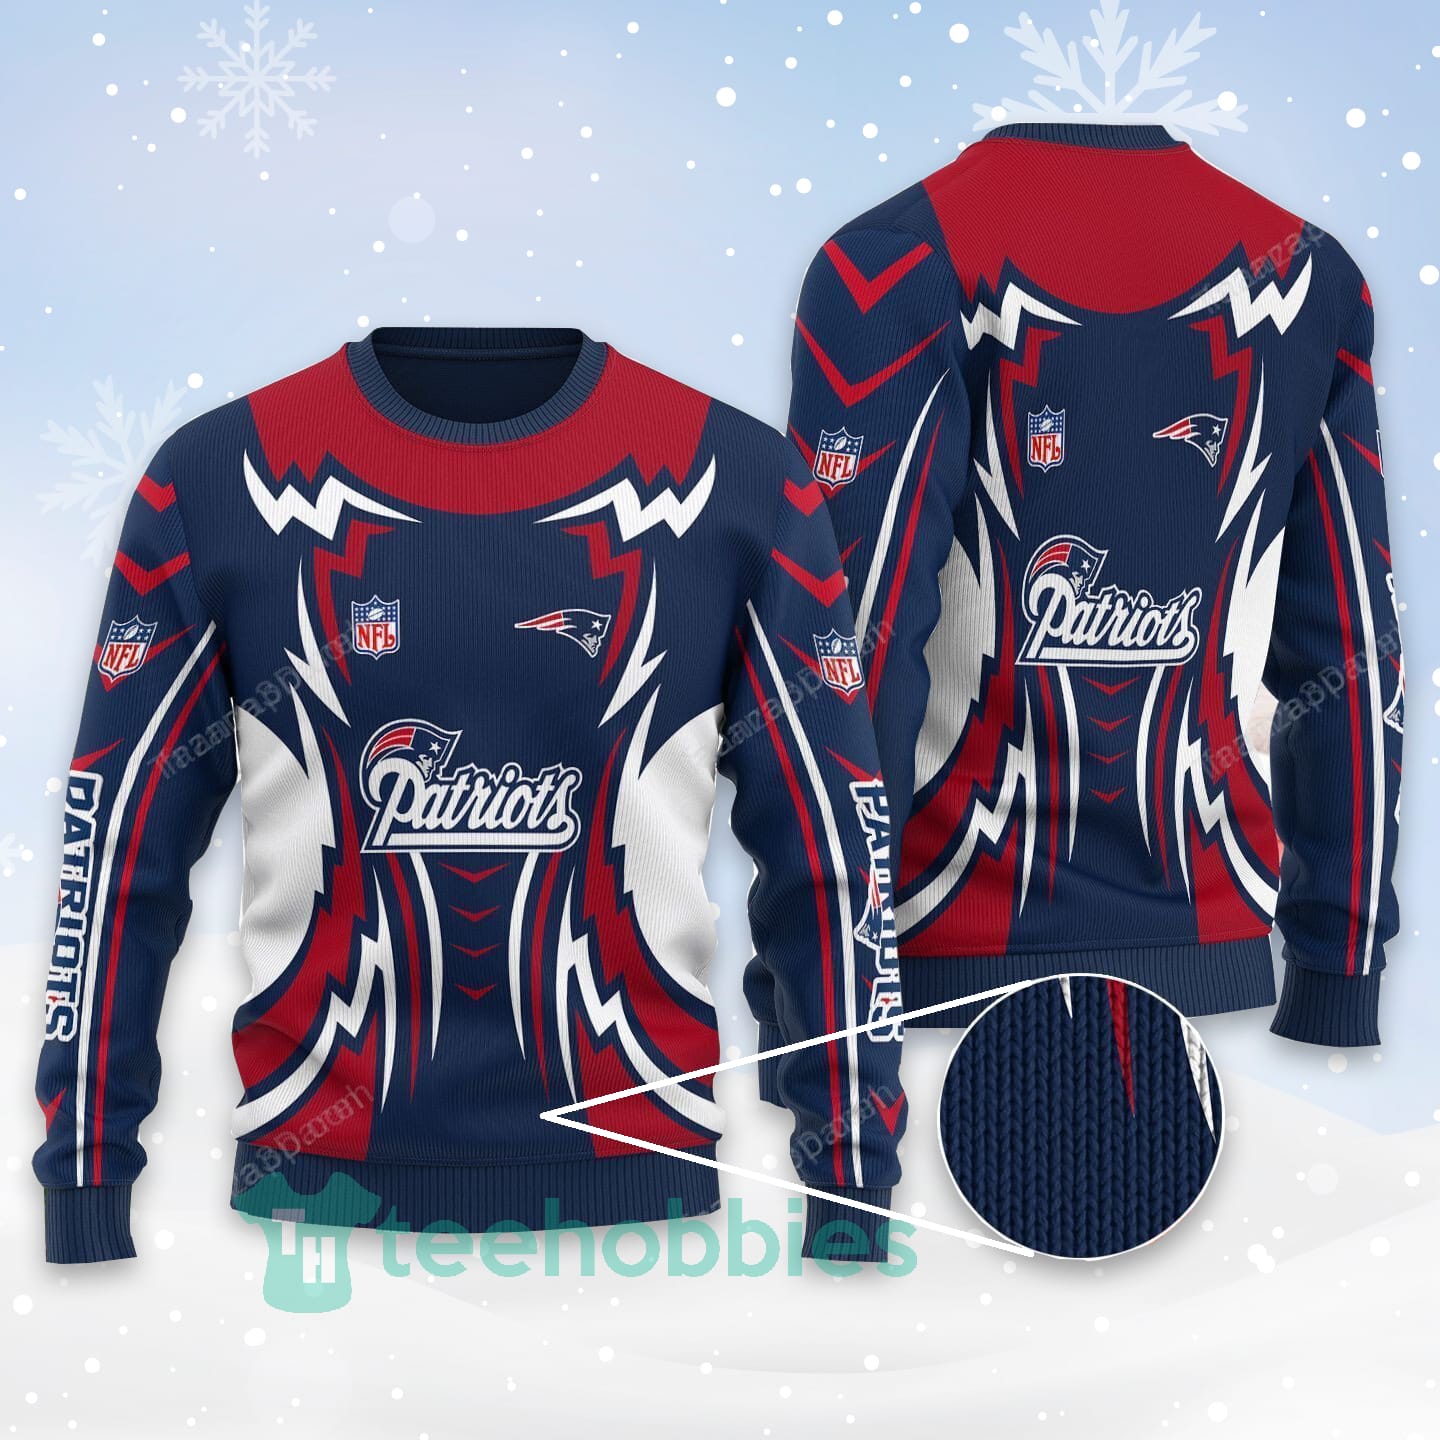 New England Patriots All Over Printed Christmas Sweater